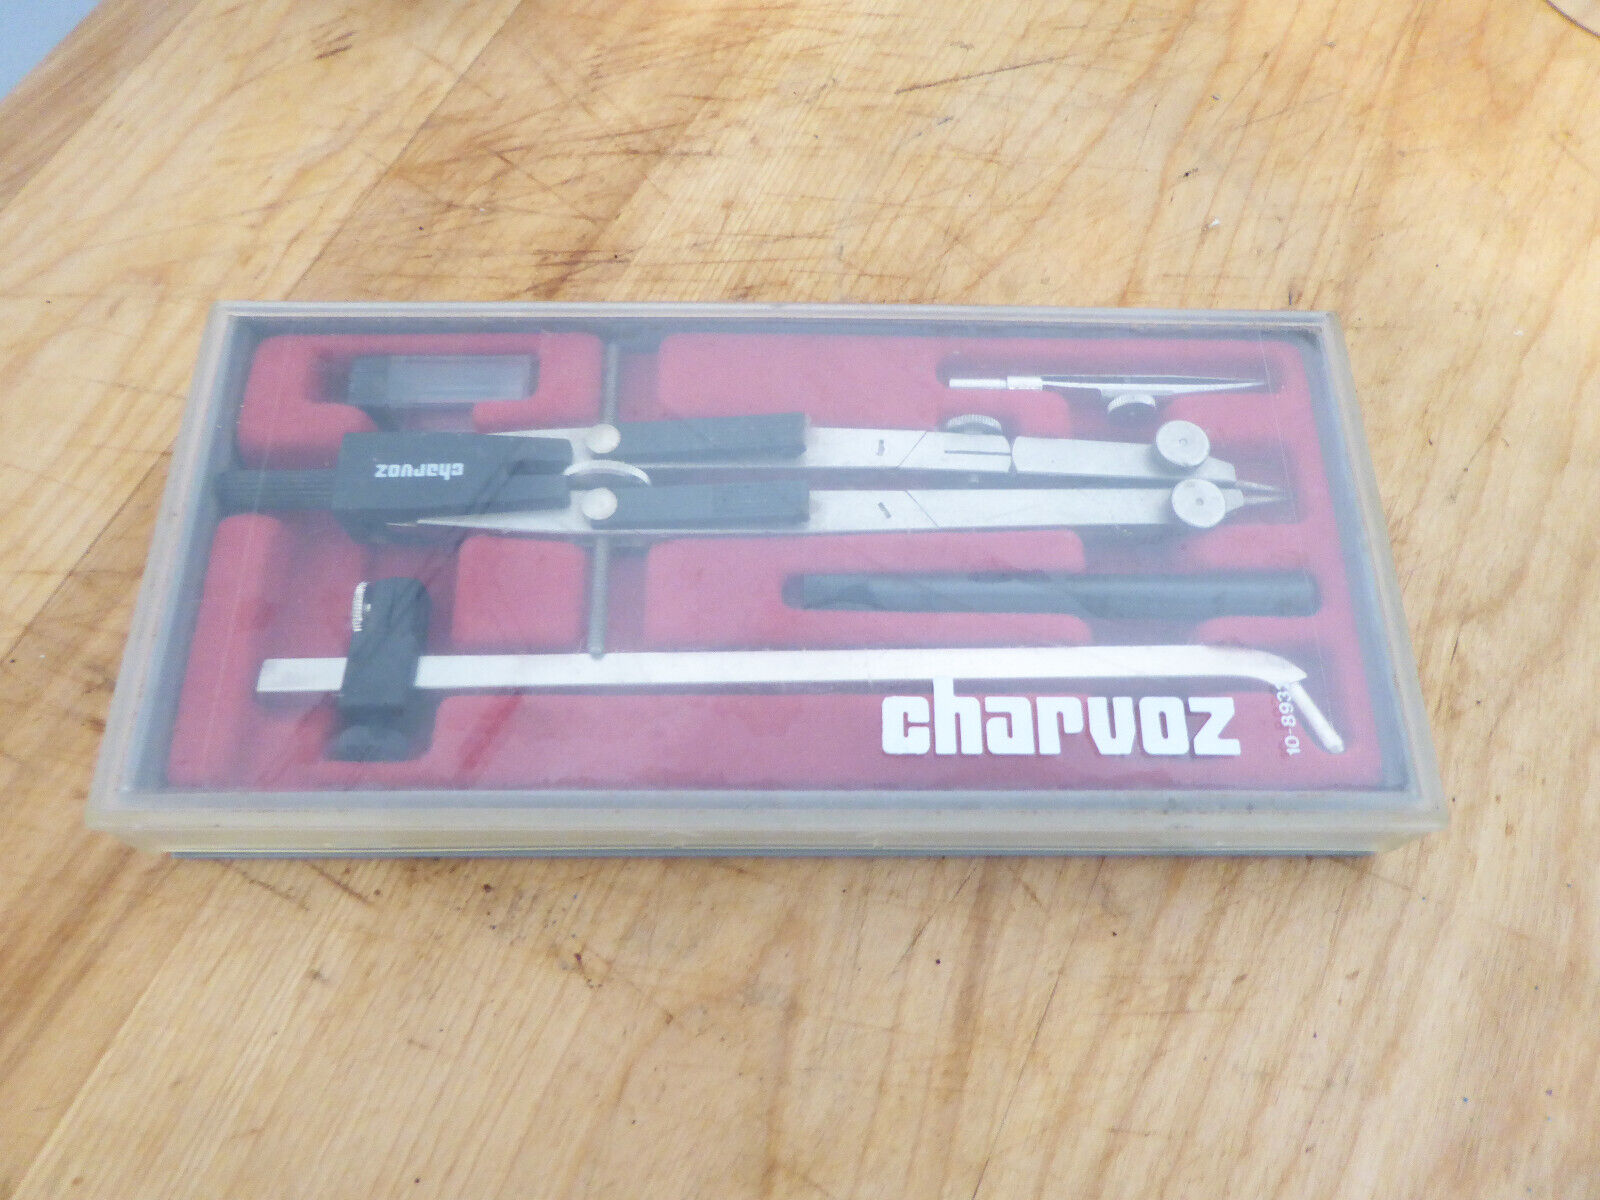 Charvoz # 10-8932 Drafting Instruments With Case